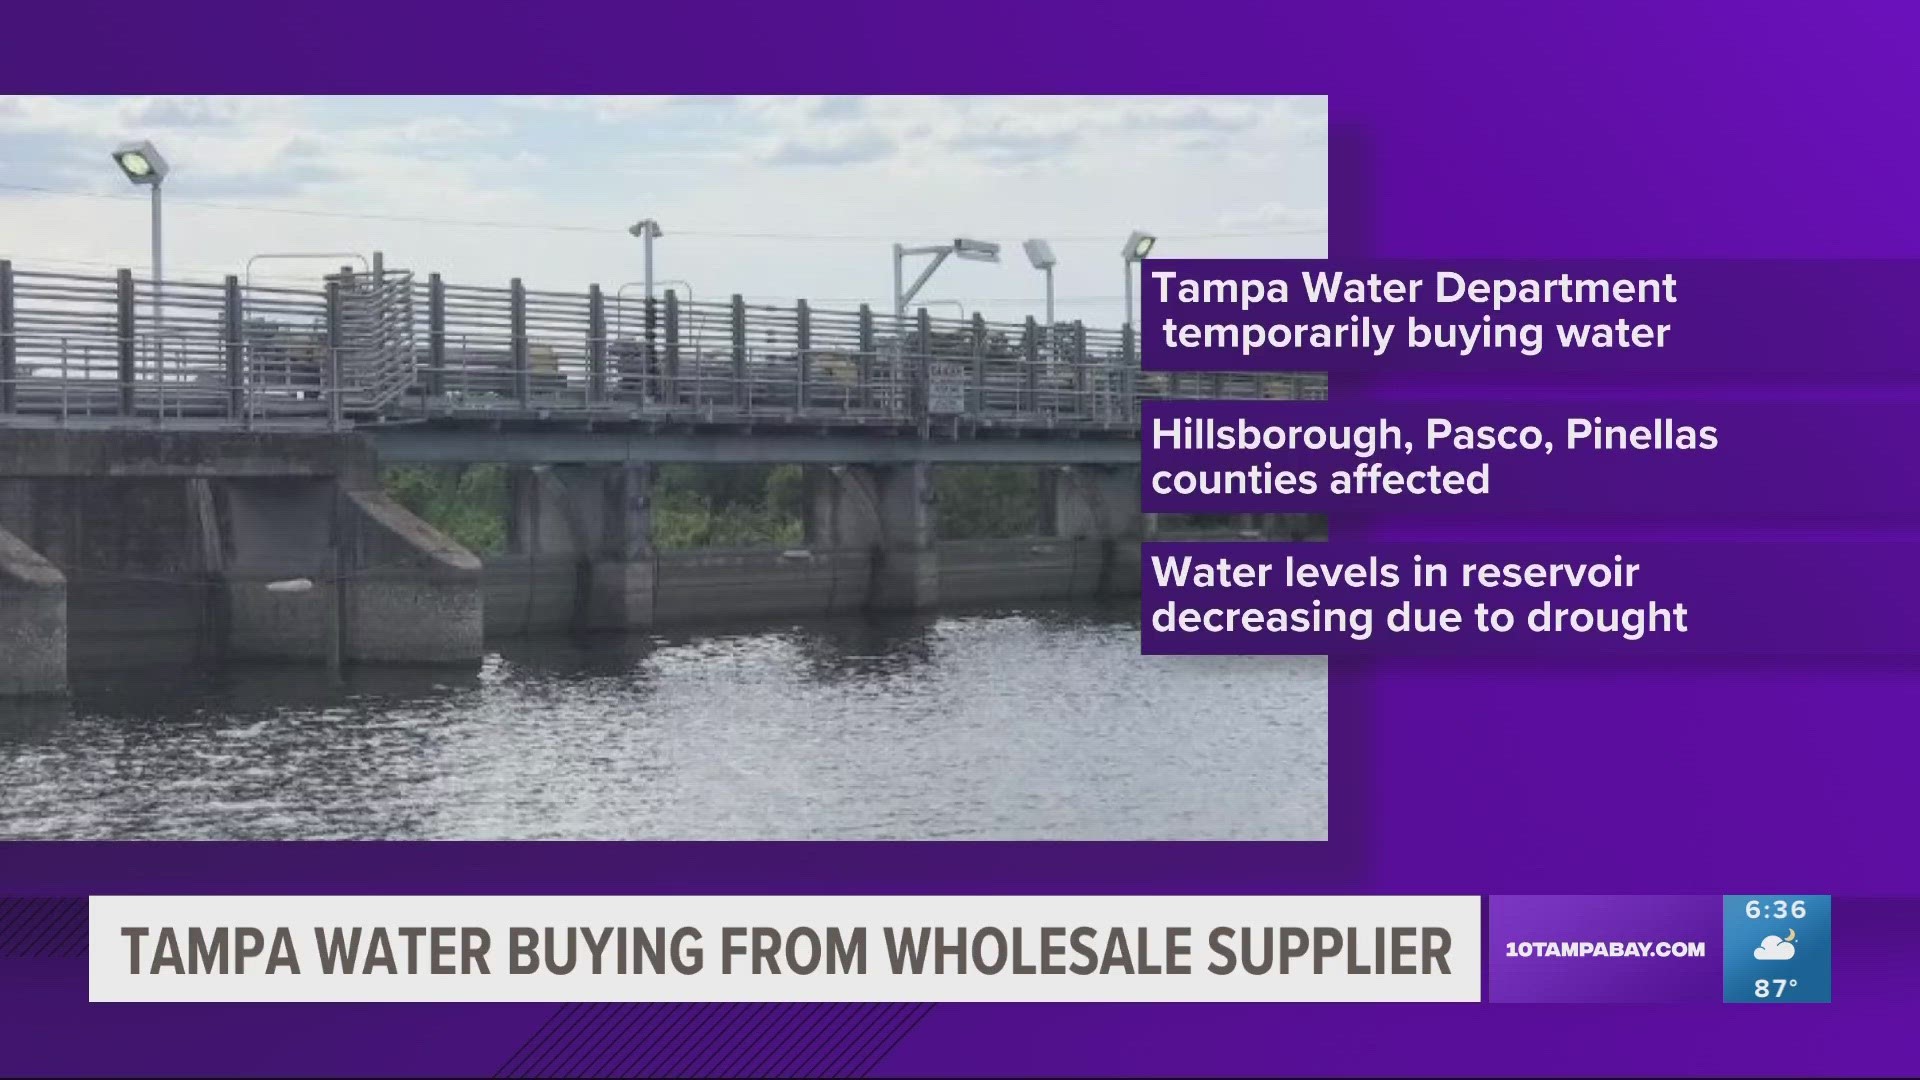 The city of Tampa said Tampa Bay Water supplies wholesale drinking water to Hillsborough, Pasco and Pinellas counties.